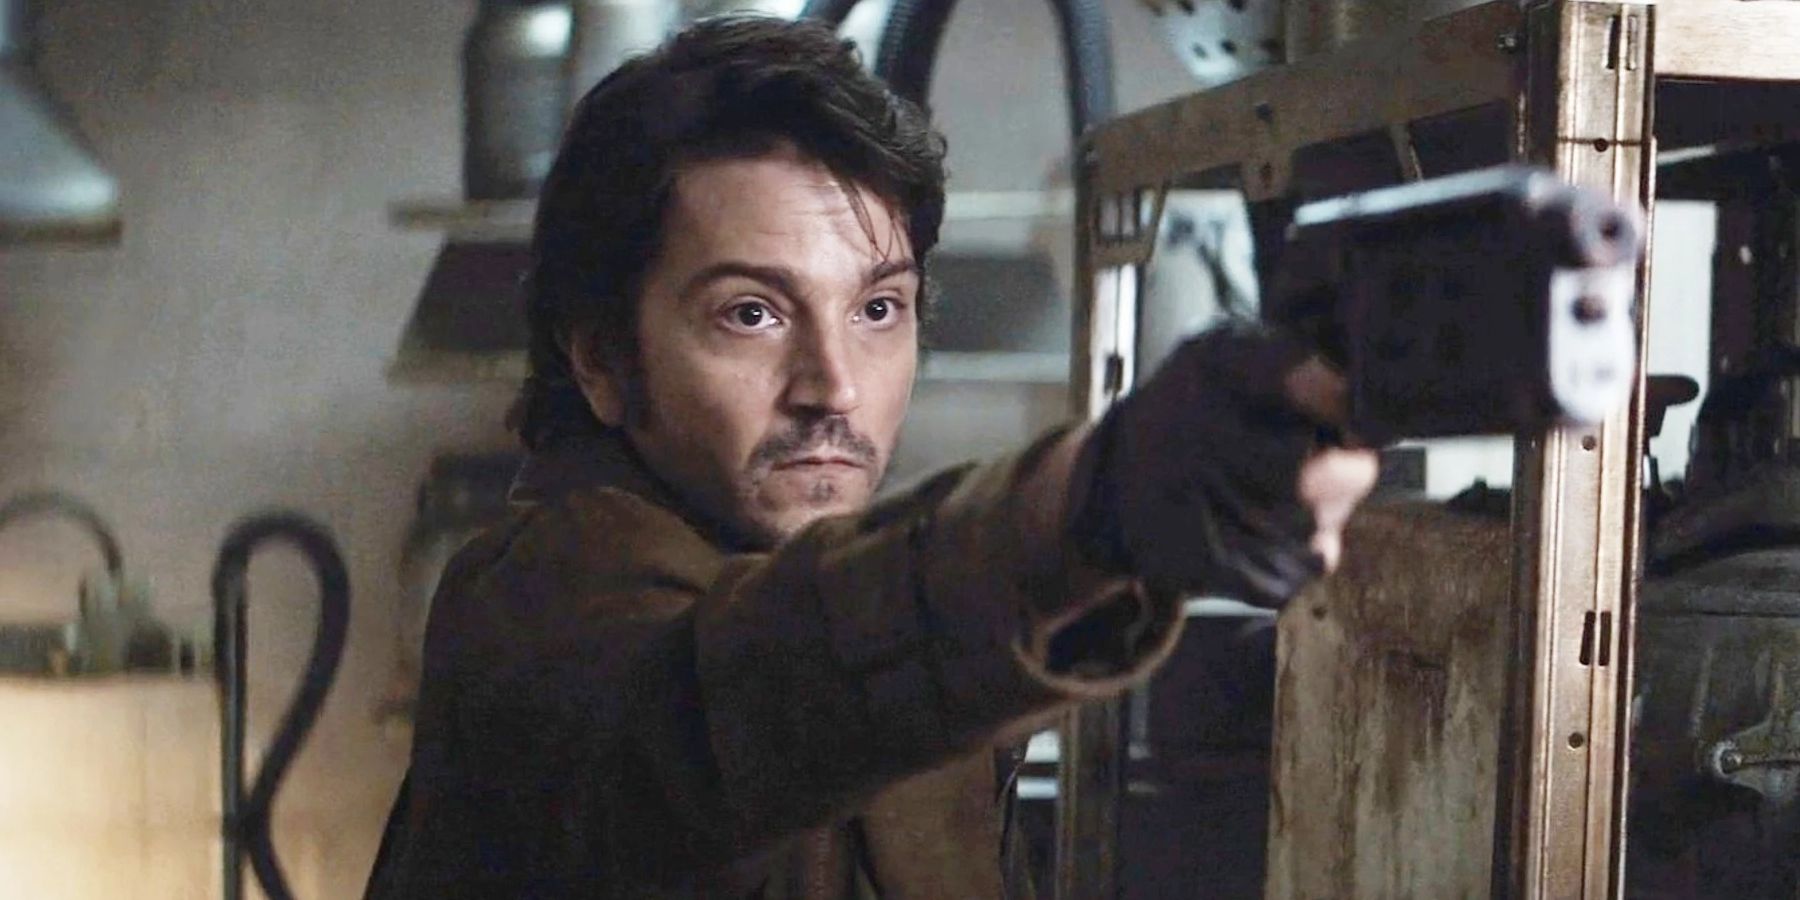 Diego Luna as Cassian Andor pointing a blaster gun weapon in Star Wars Andor with a serious look on his face